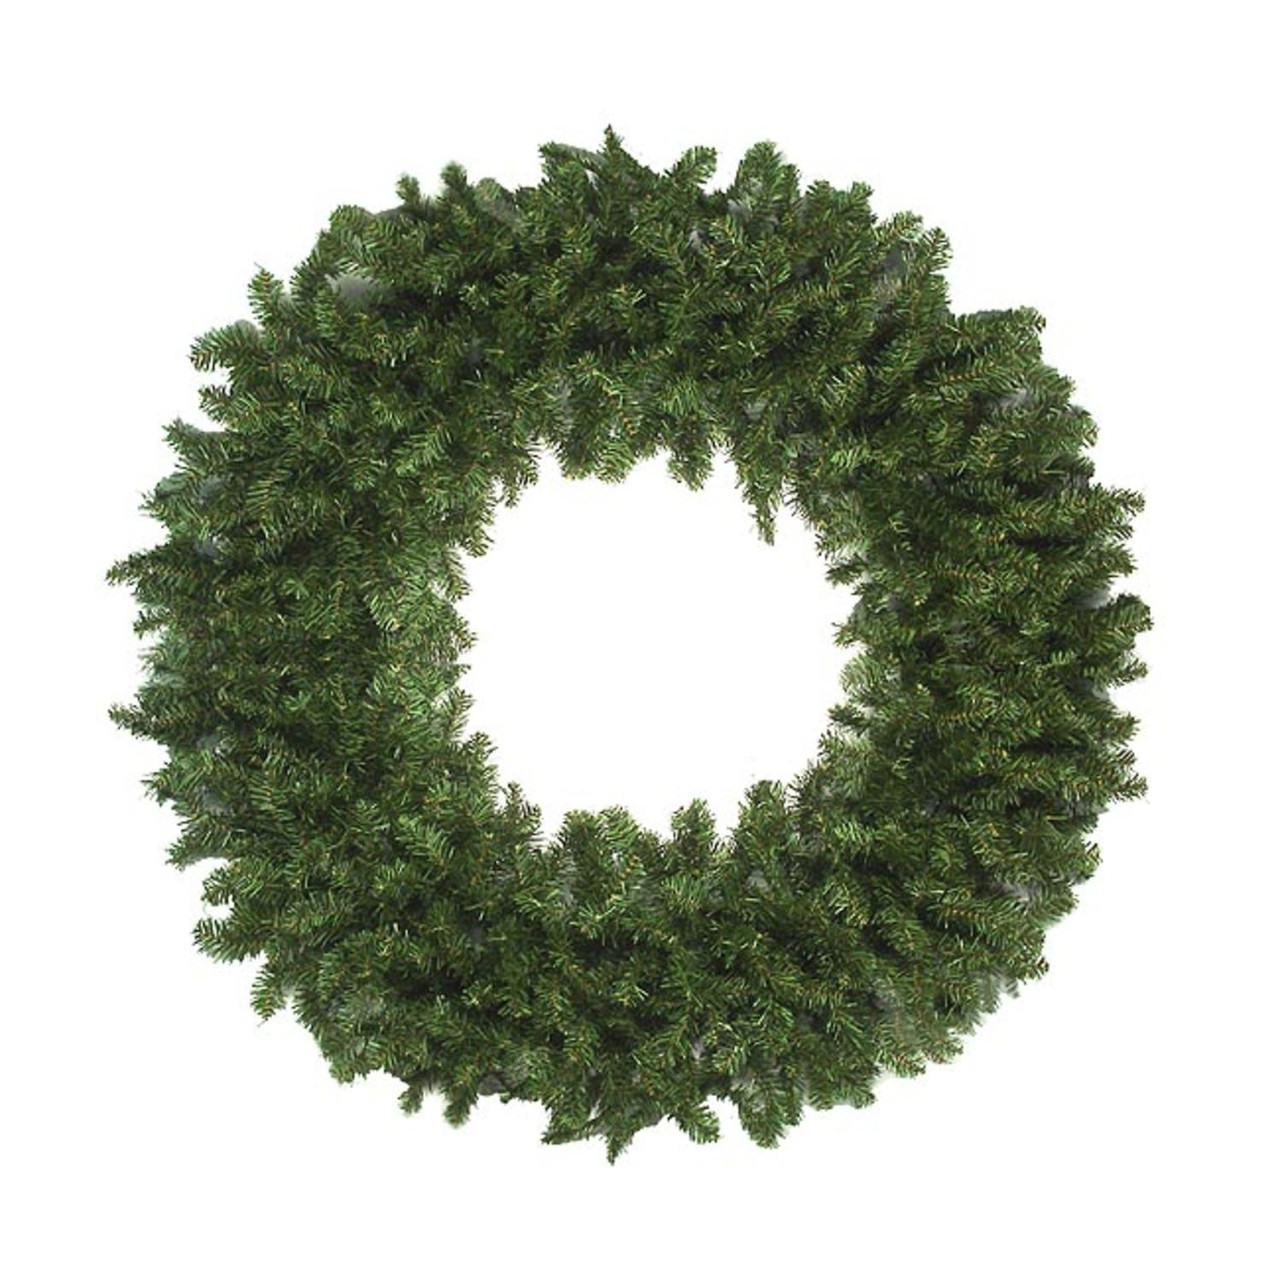 Darice Metal Wreath Form - Green - 10 Inches